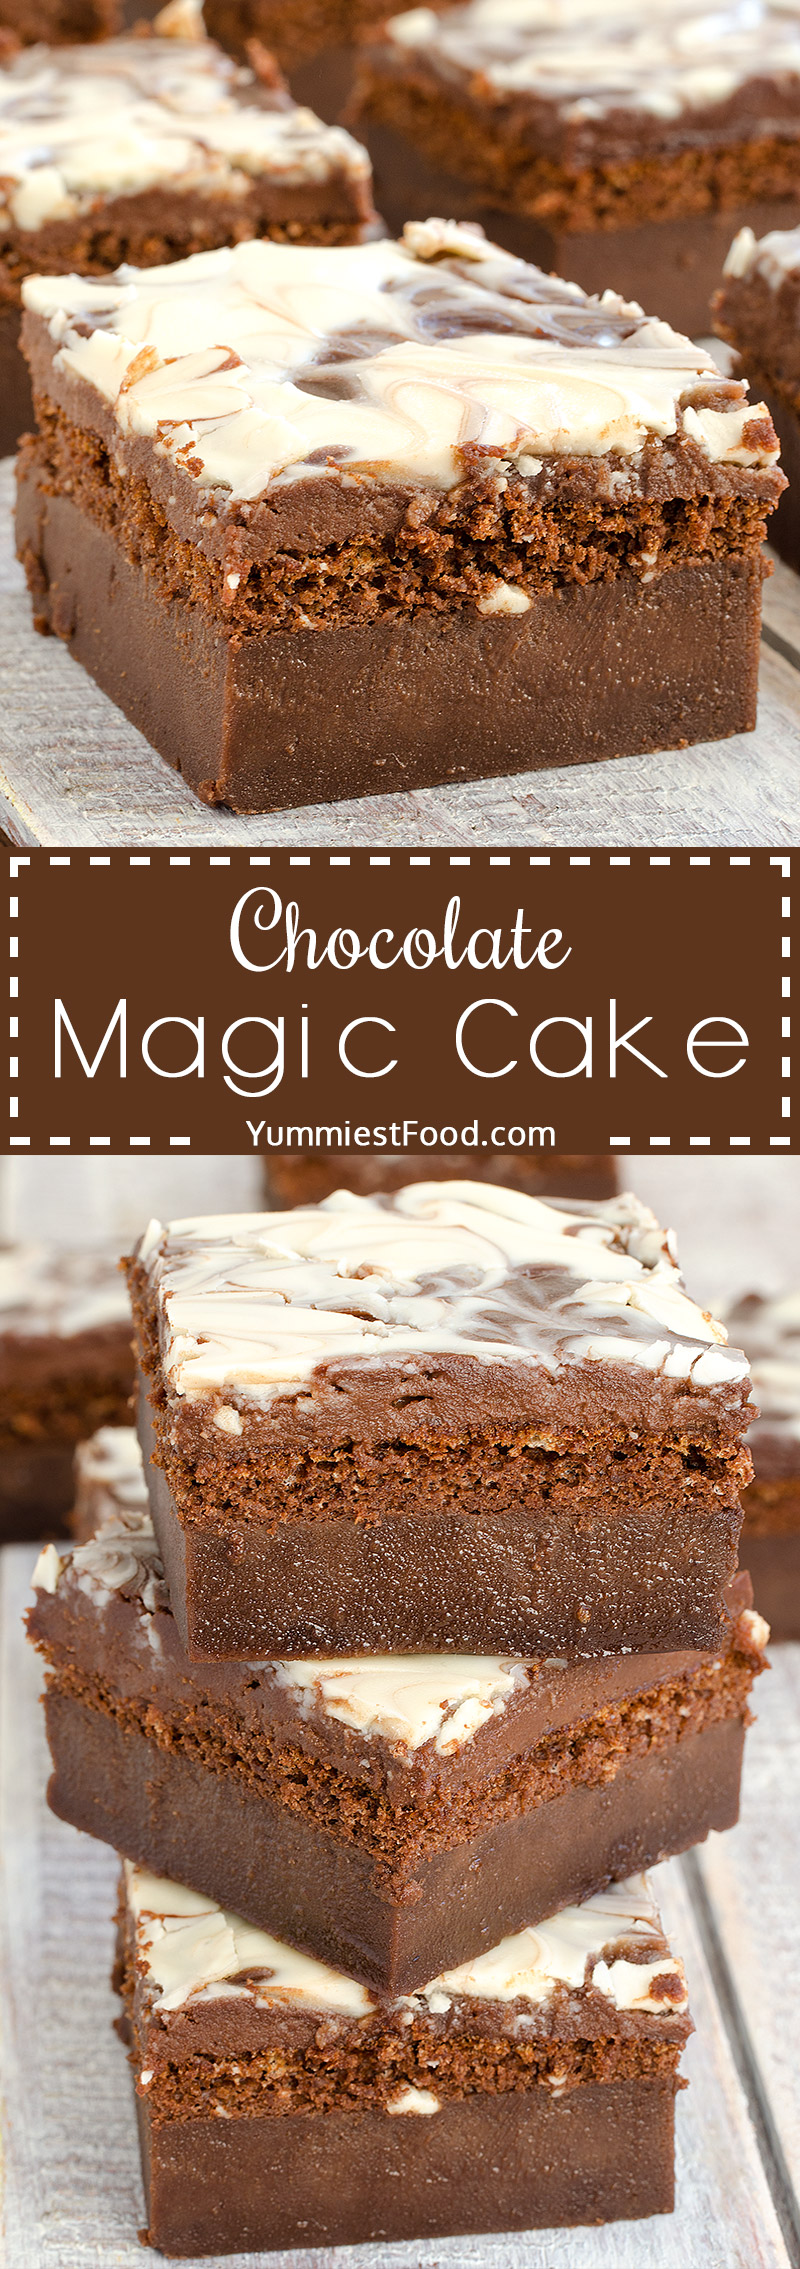 Chocolate Magic Cake with Chocolate Glaze and Swirl – moist, delicious, easy, nice and quick. This Chocolate Magic Cake with Chocolate Glaze and Swirl will be your ultimate dessert for every occasion.